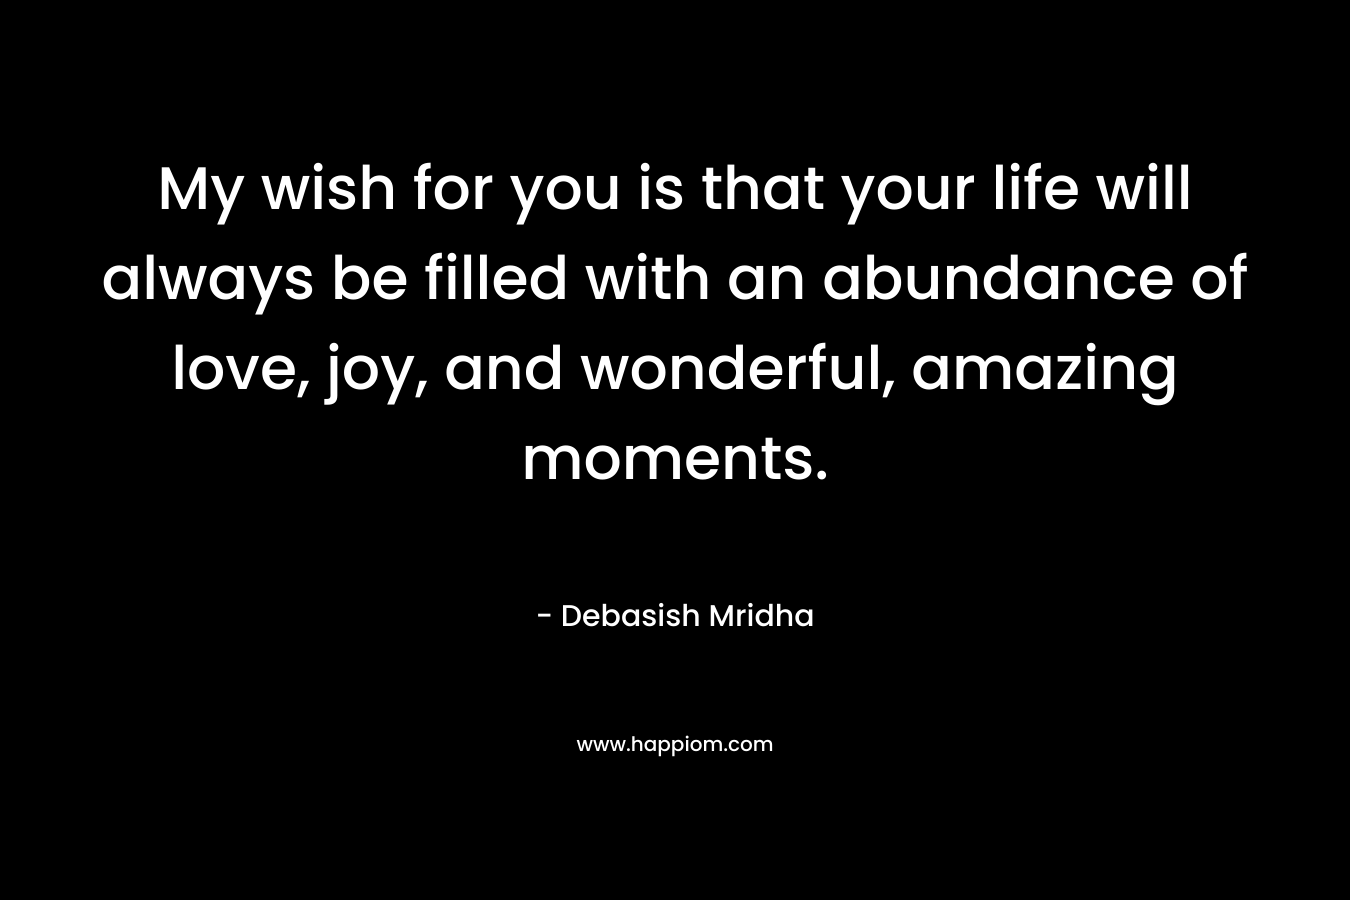 My wish for you is that your life will always be filled with an abundance of love, joy, and wonderful, amazing moments.